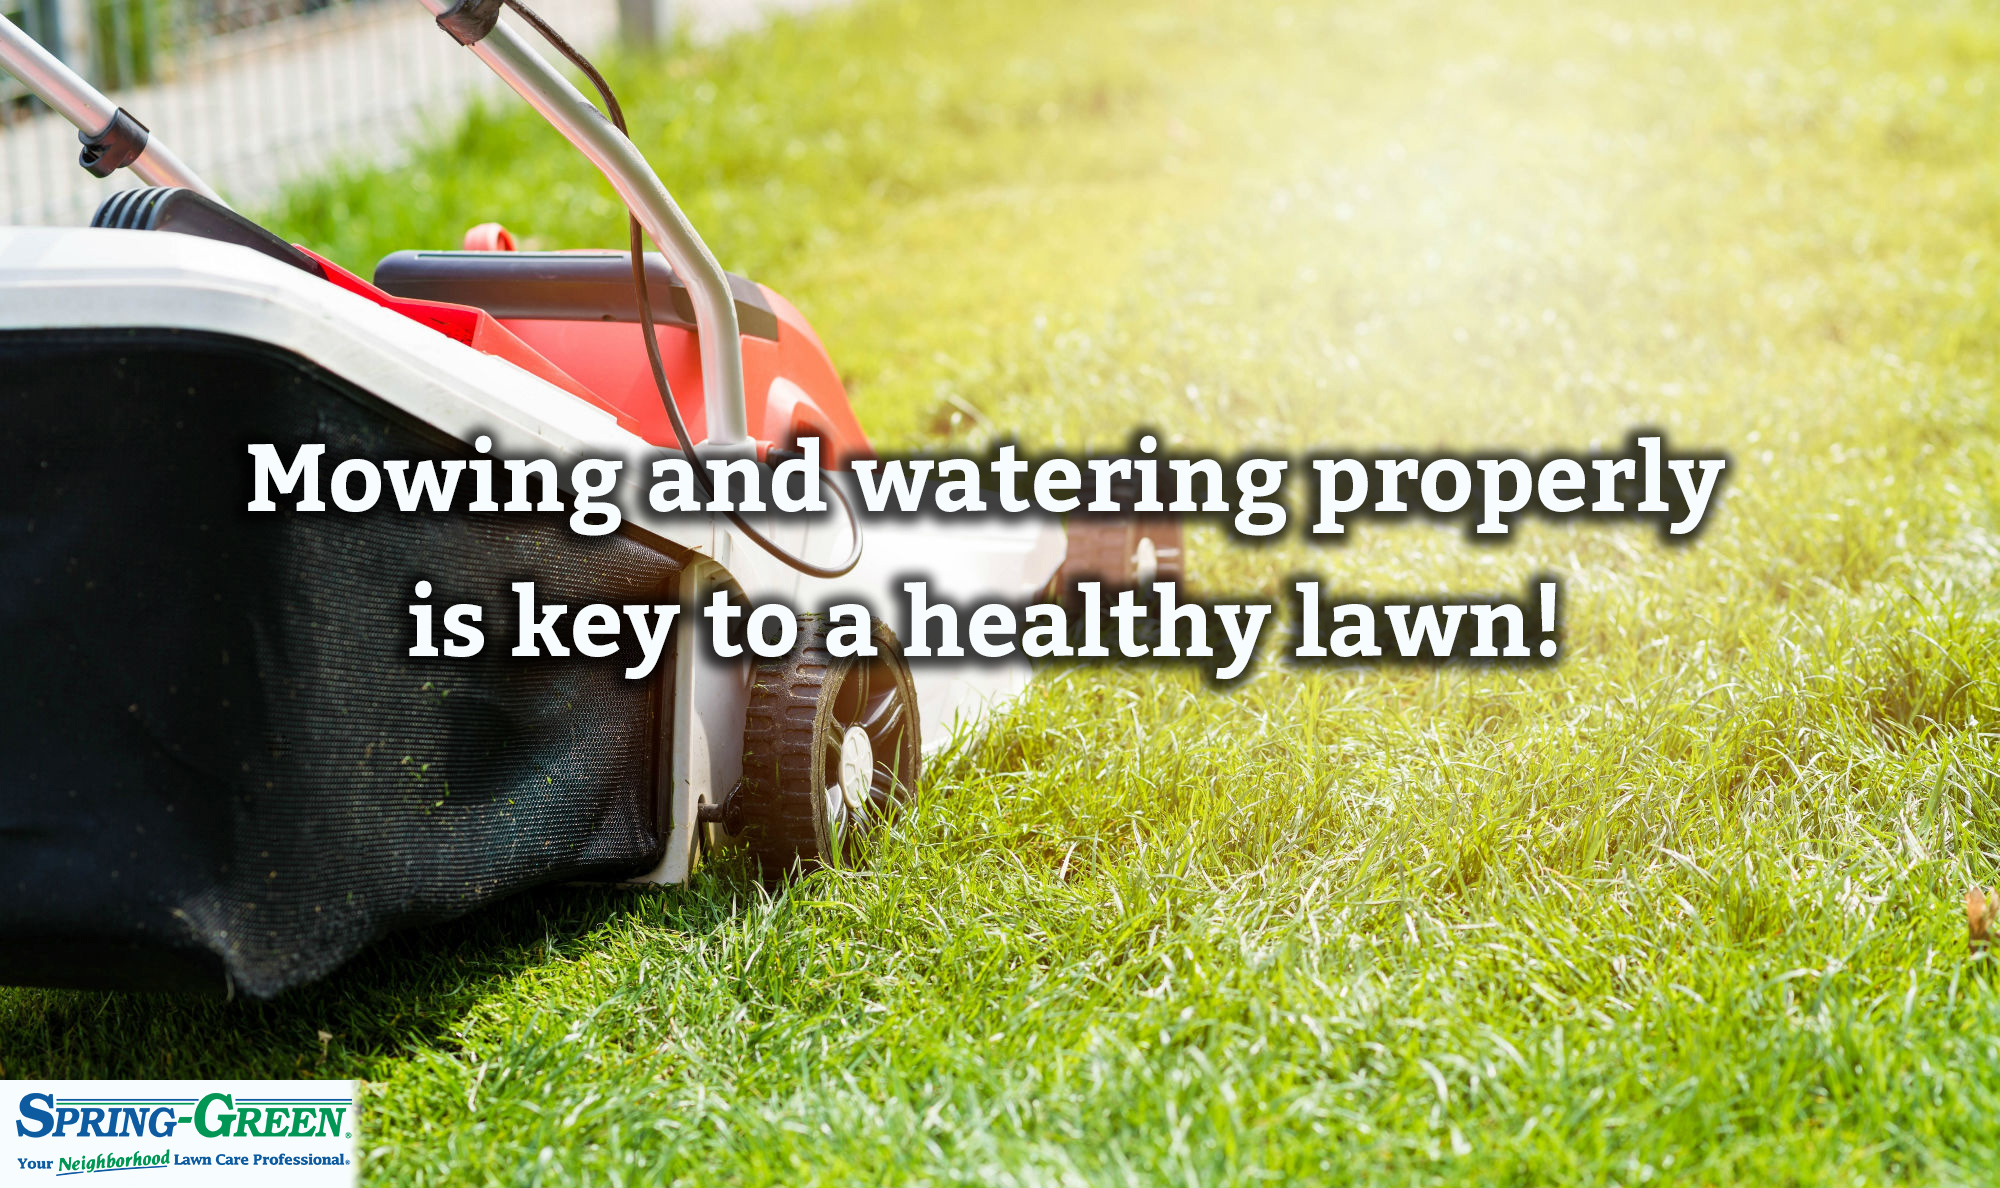 Summer Lawn Care: Mowing and Watering Tips - Spring Green